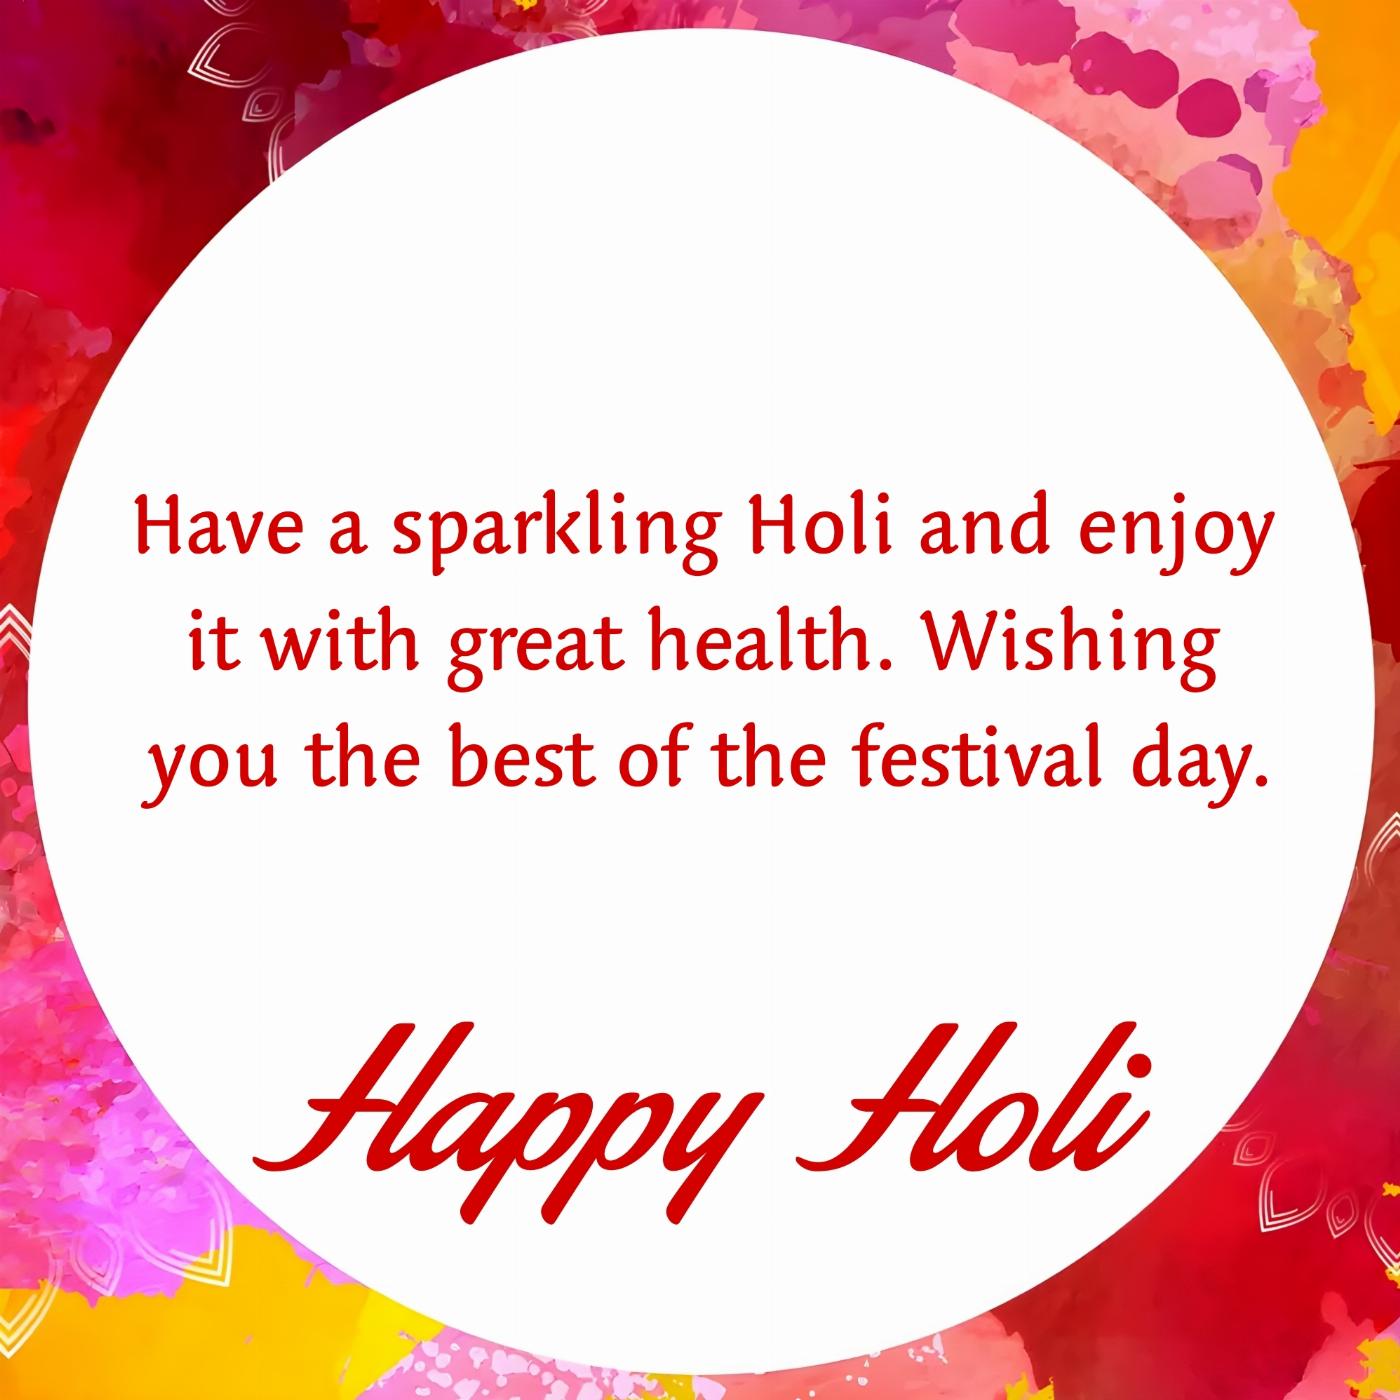 Have a sparkling Holi and enjoy it with great health